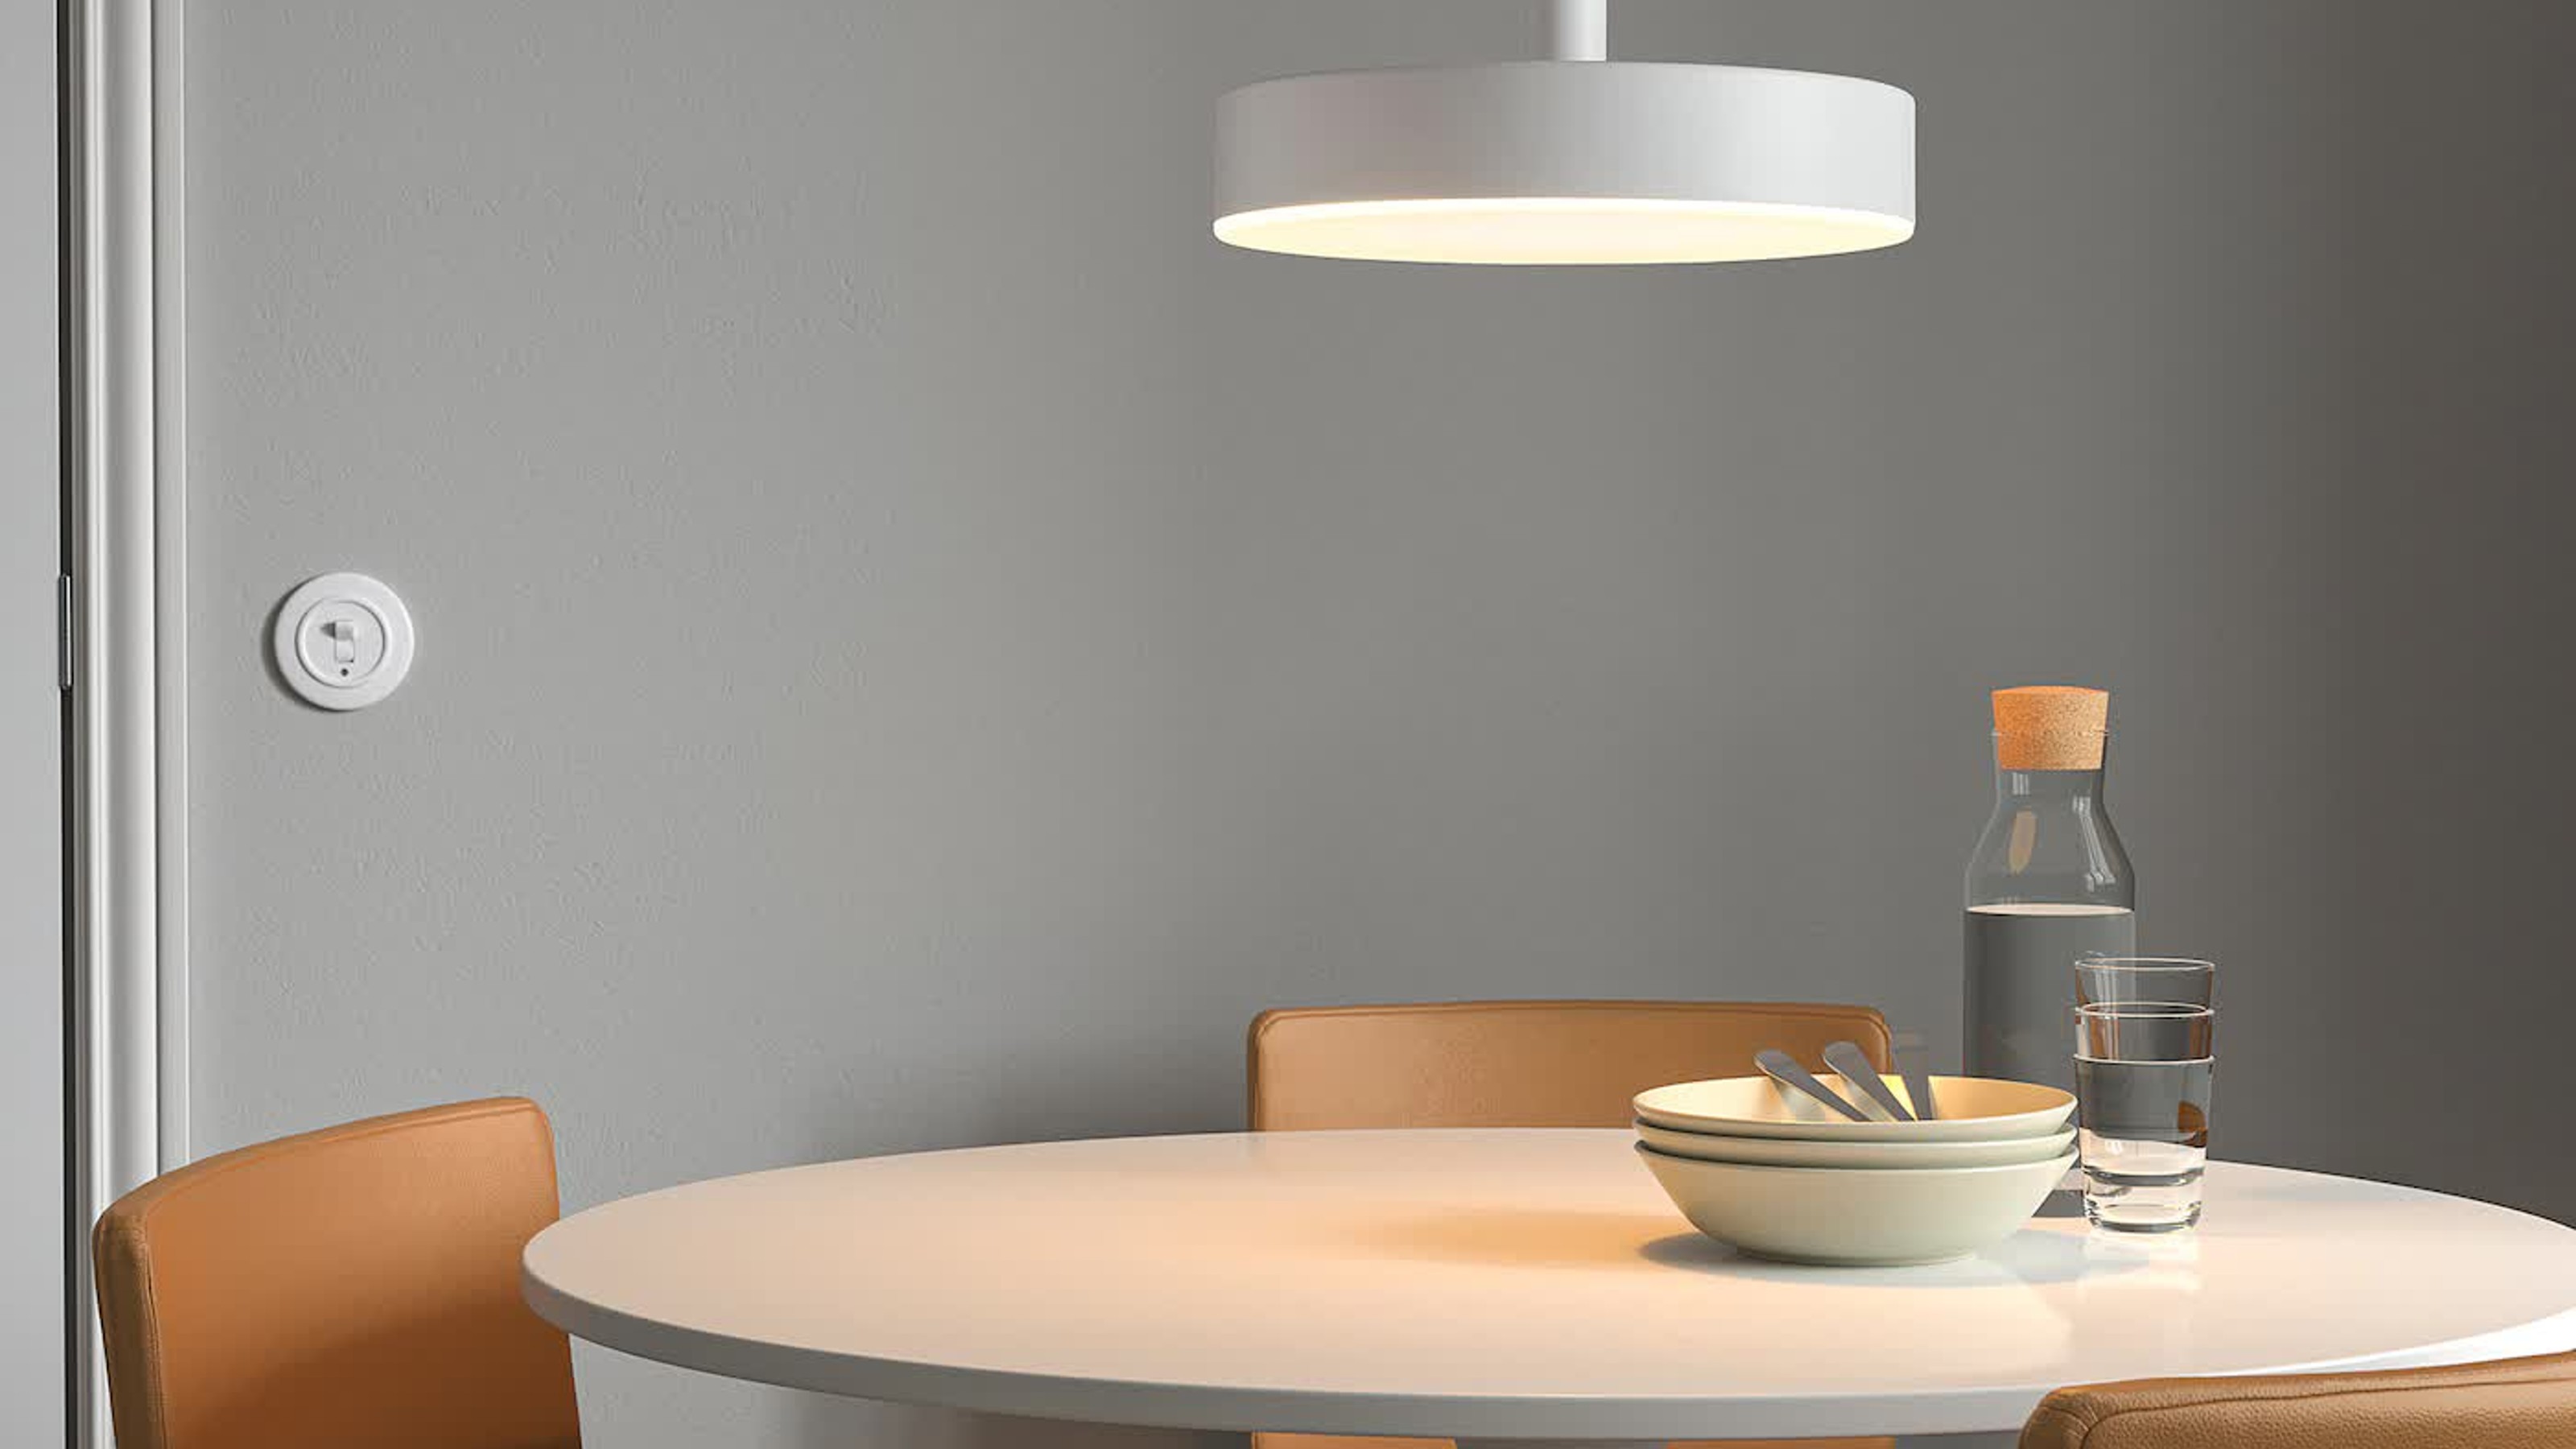 IKEA's new NYMANE smart lamp is a must for a dining room